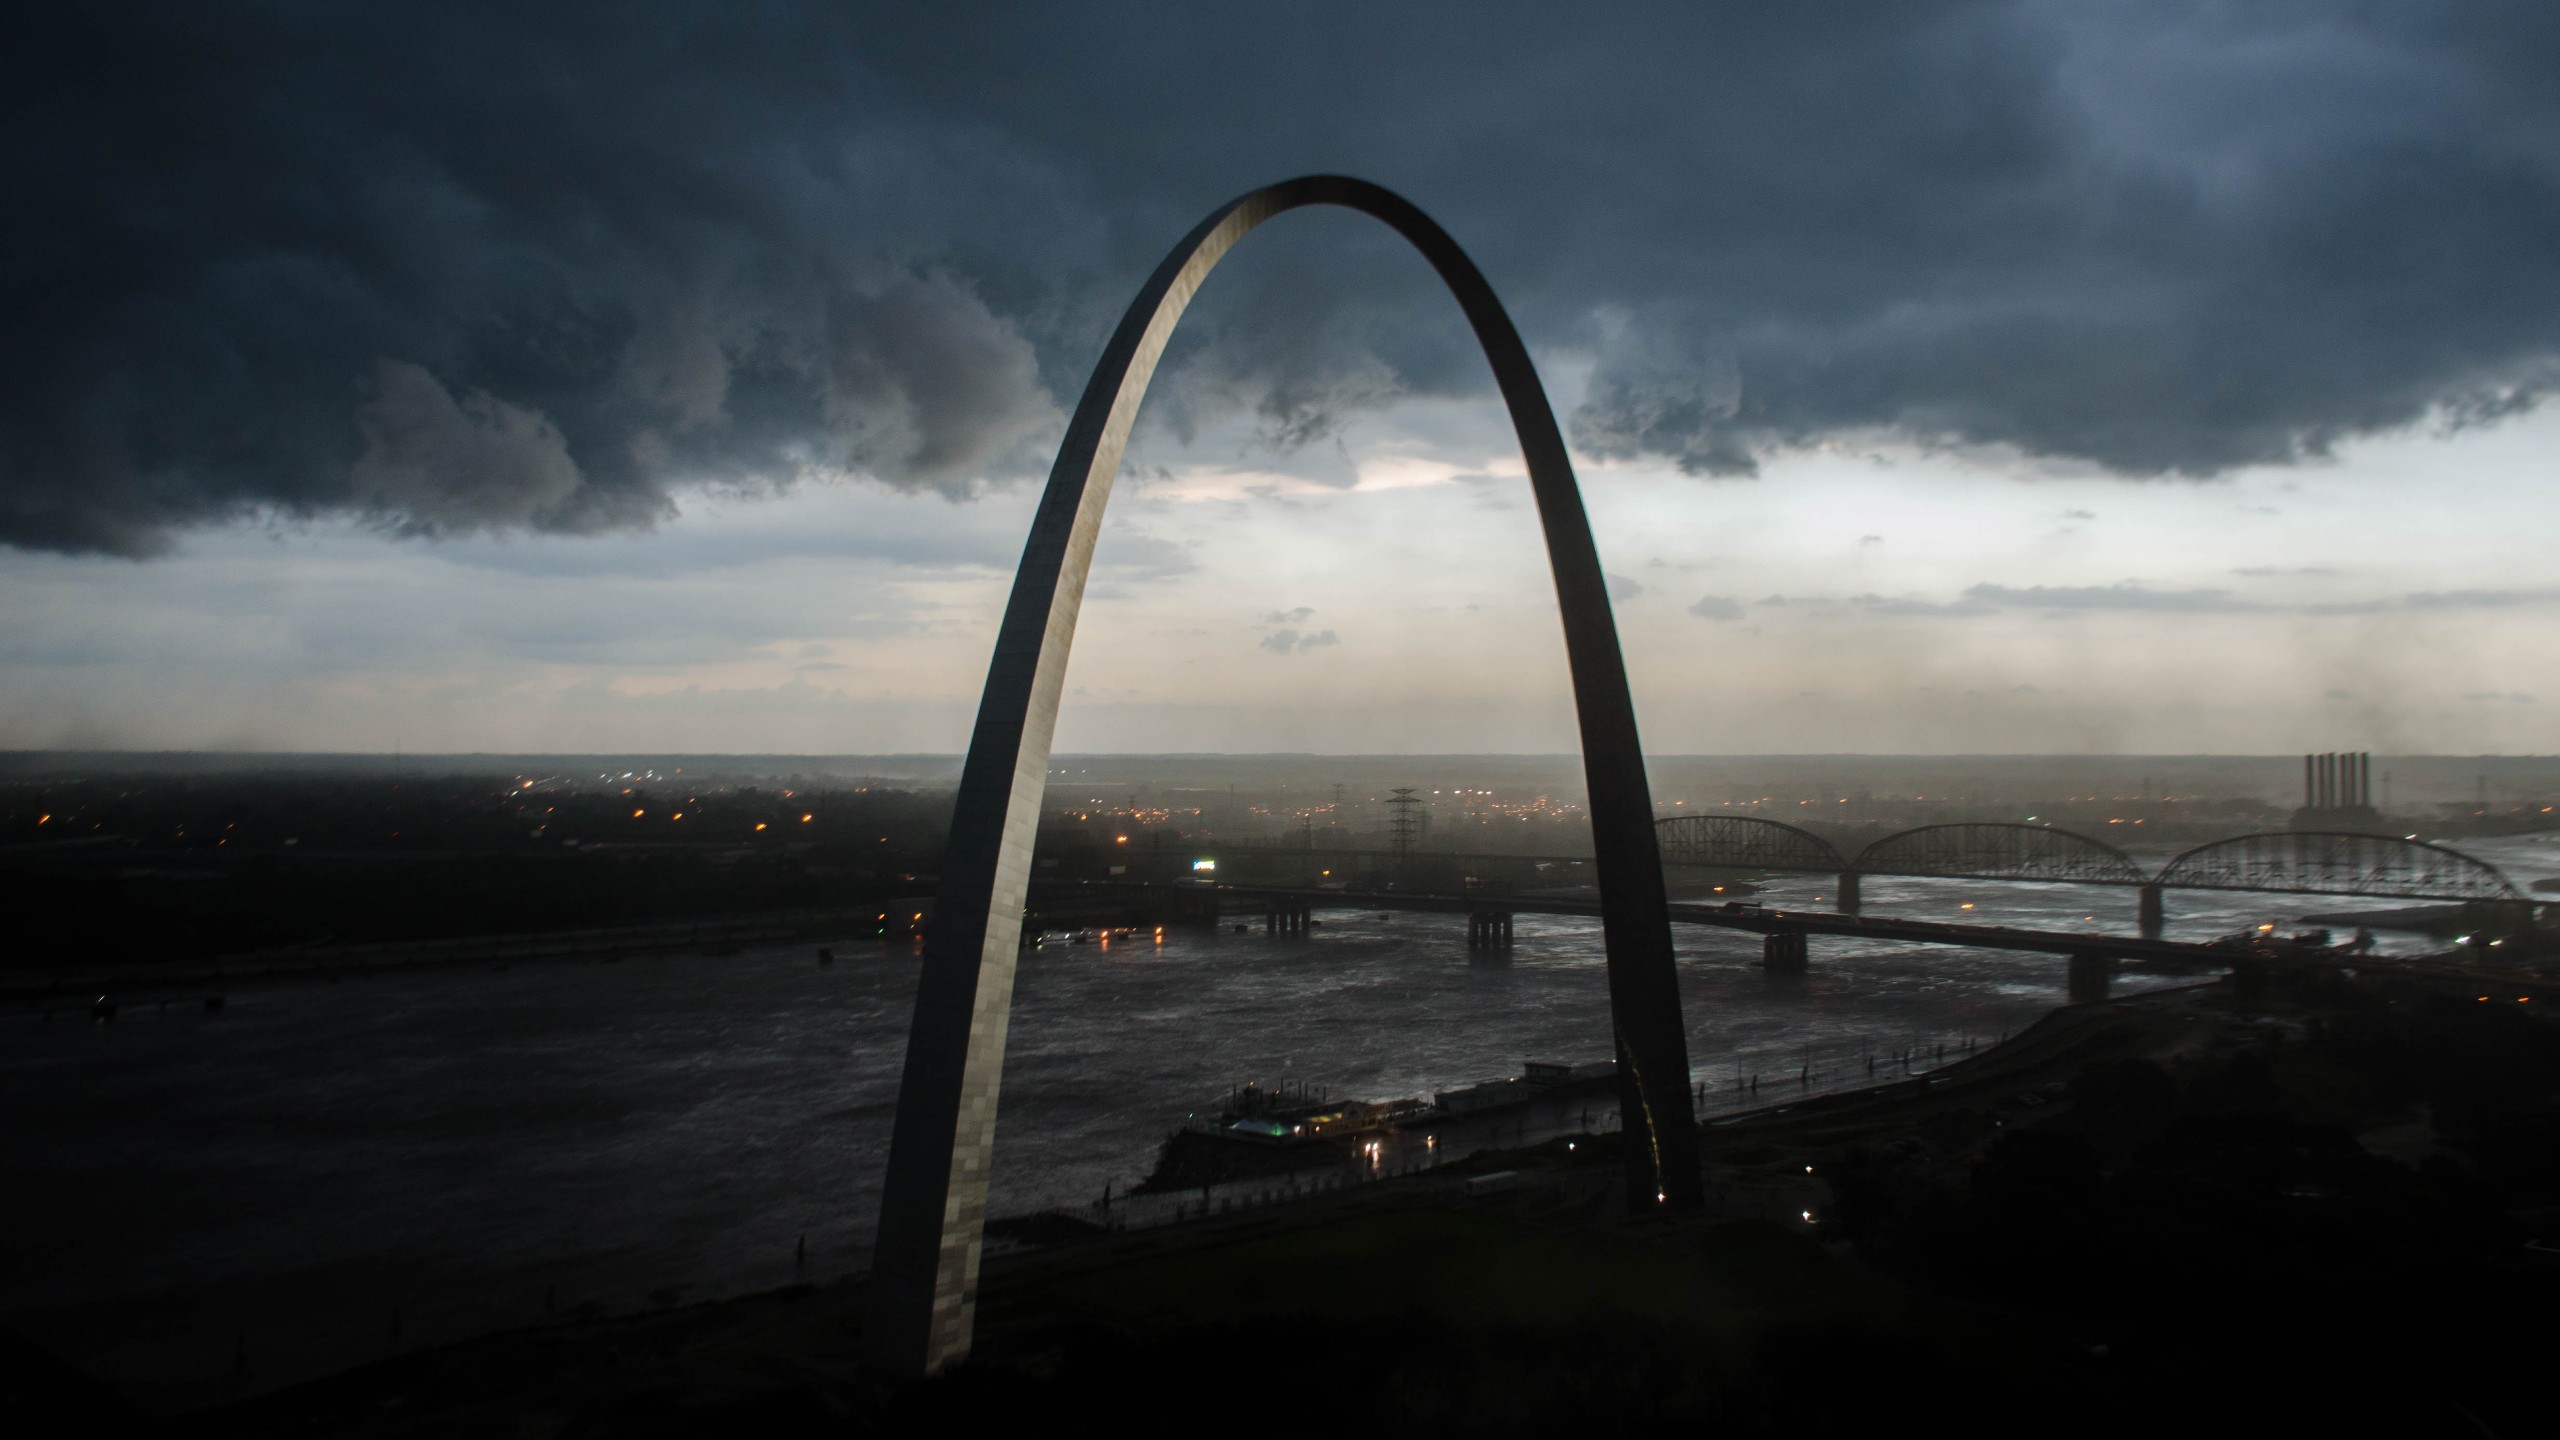 General 2560x1440 arch St. Louis storm clouds USA cityscape dark sky